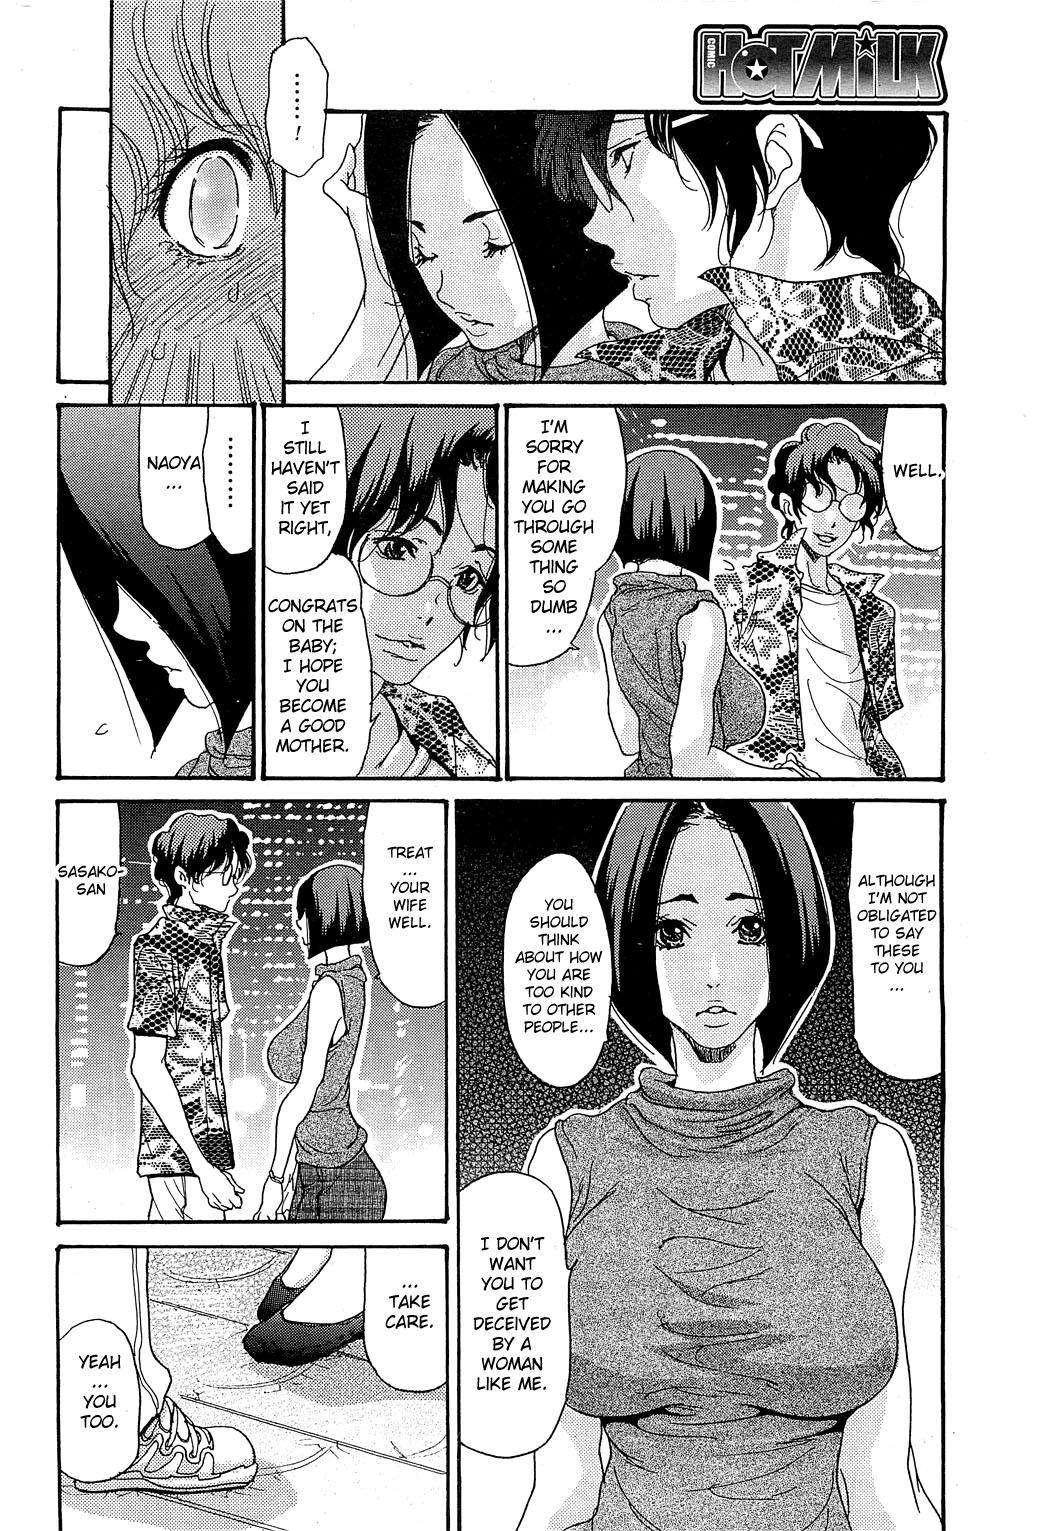 [Aoi Hitori] Umi no Yeah!! 2013 ~The Peaceful Married Couple's Hair Trigger Crisis~ Ch.1 [English][aceonetwo] 17